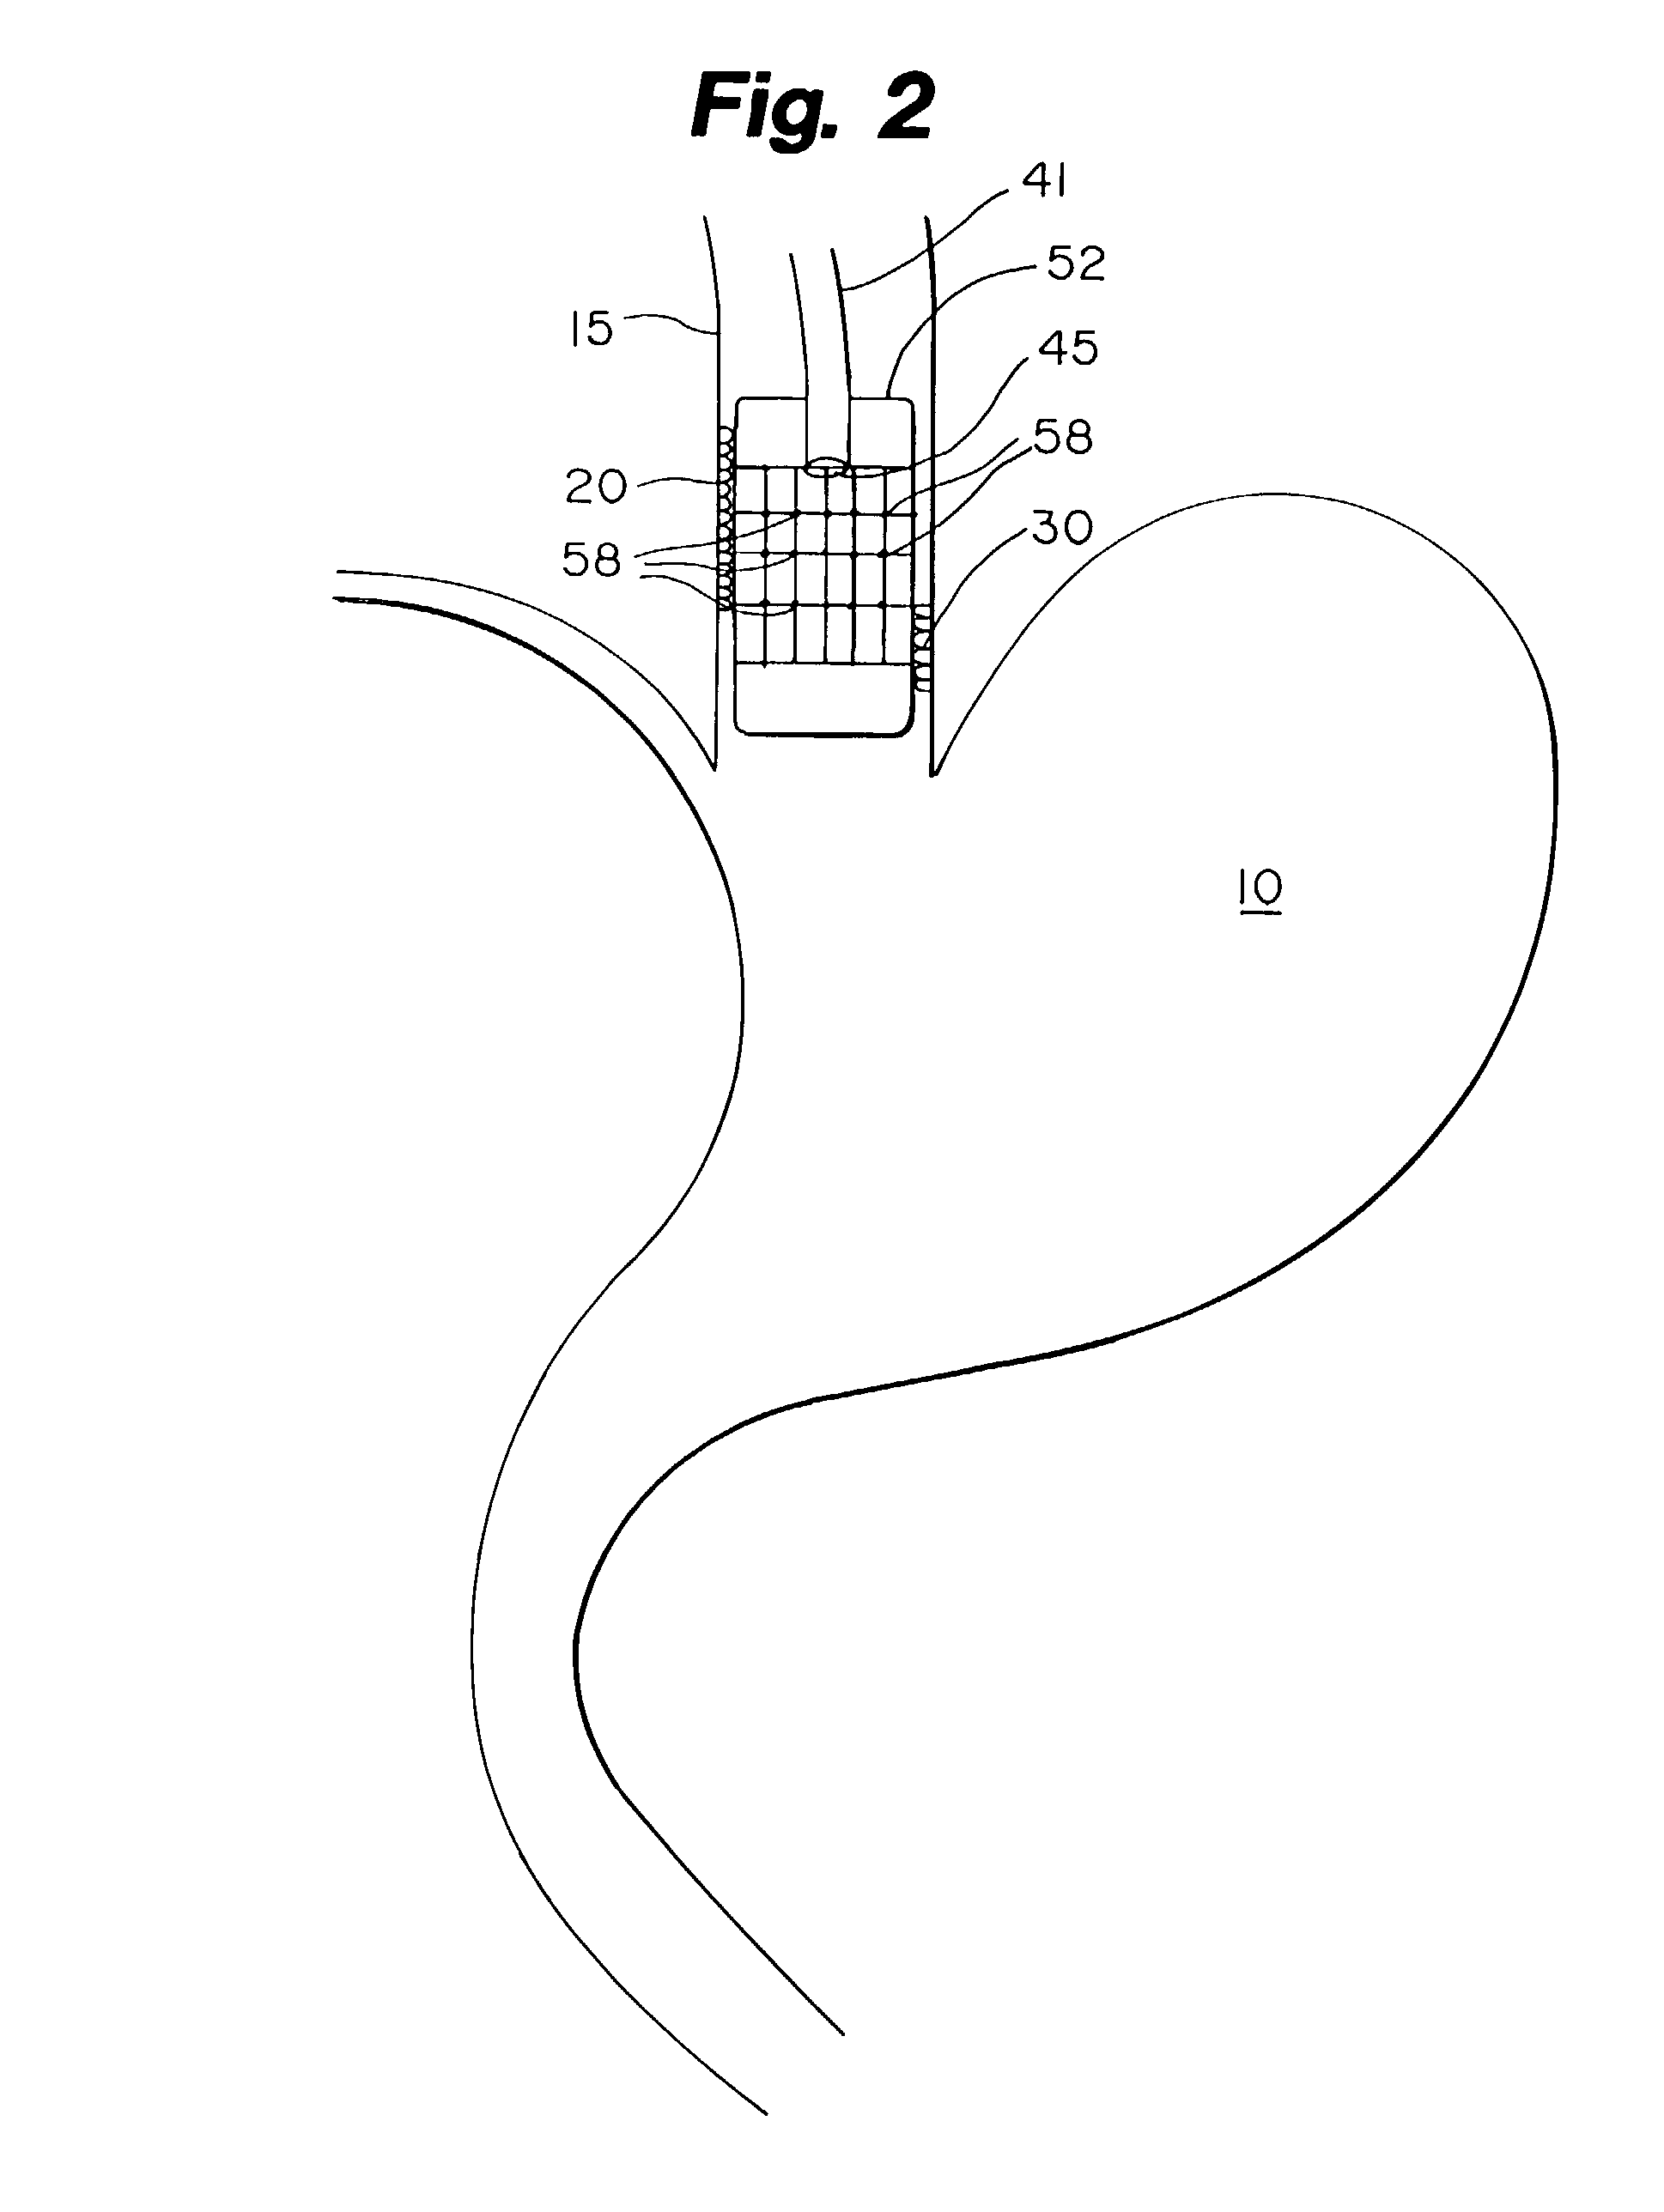 Method of treating abnormal tissue in the human esophagus